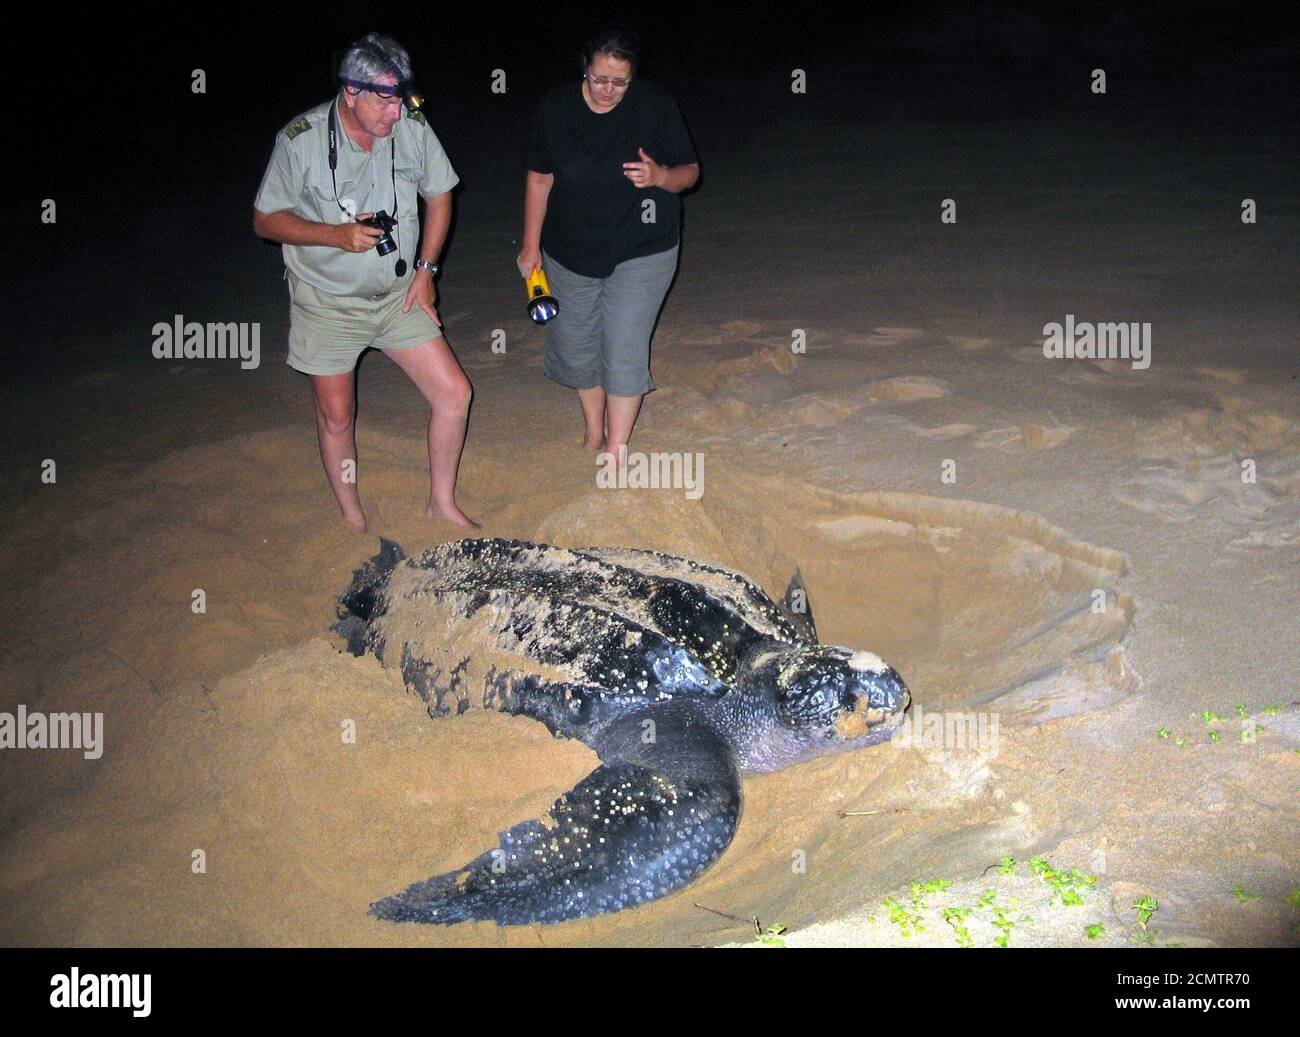 TO MATCH FEATURE ENVIRONMENT WARMING TURTLES - Jeff Gaisford of KZN wildlife (L), the conservation body of South Africa's KwaZulu-Natal province shows a tourist a nesting leatherback turtle in this picture taken on January 10, 2005 in Rocktail Bay. One of the oldest reptilian orders, stretching back 200 million years, turtles have been doing this for a very long time - and their resiliency raises questions about the impact of climate and sea level change on biodiversity. REUTERS/Ed Stoddard  RSS/JV Stock Photo